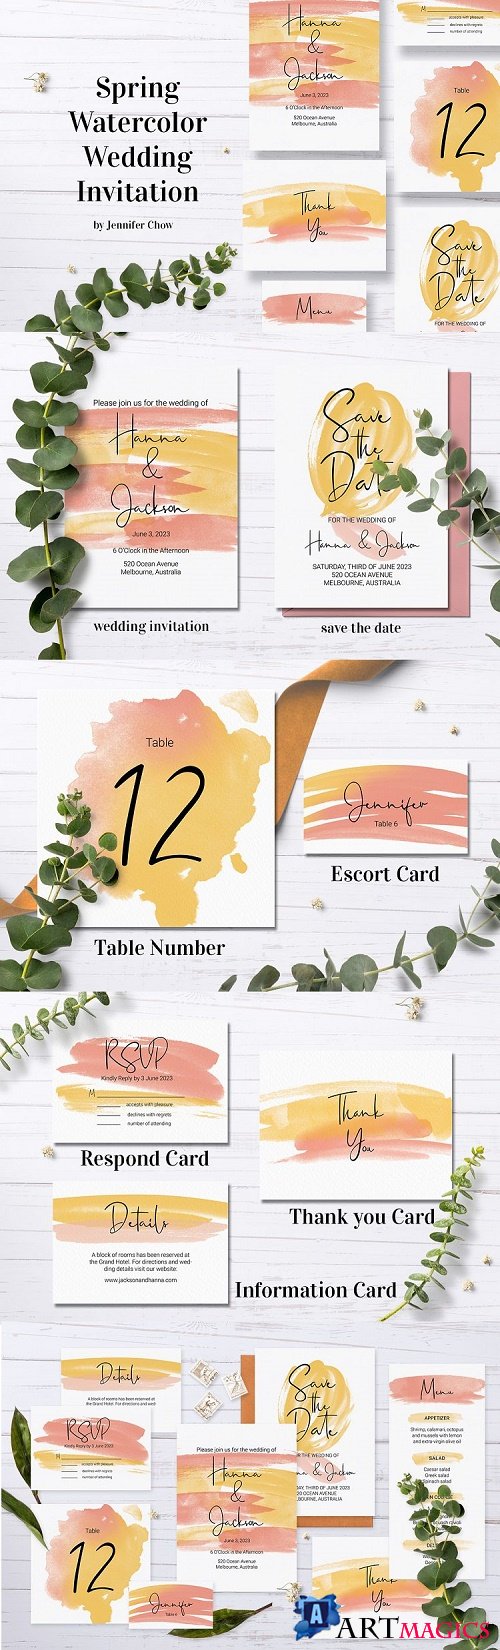 Spring Watercolor Wedding Stationery Set - 477629